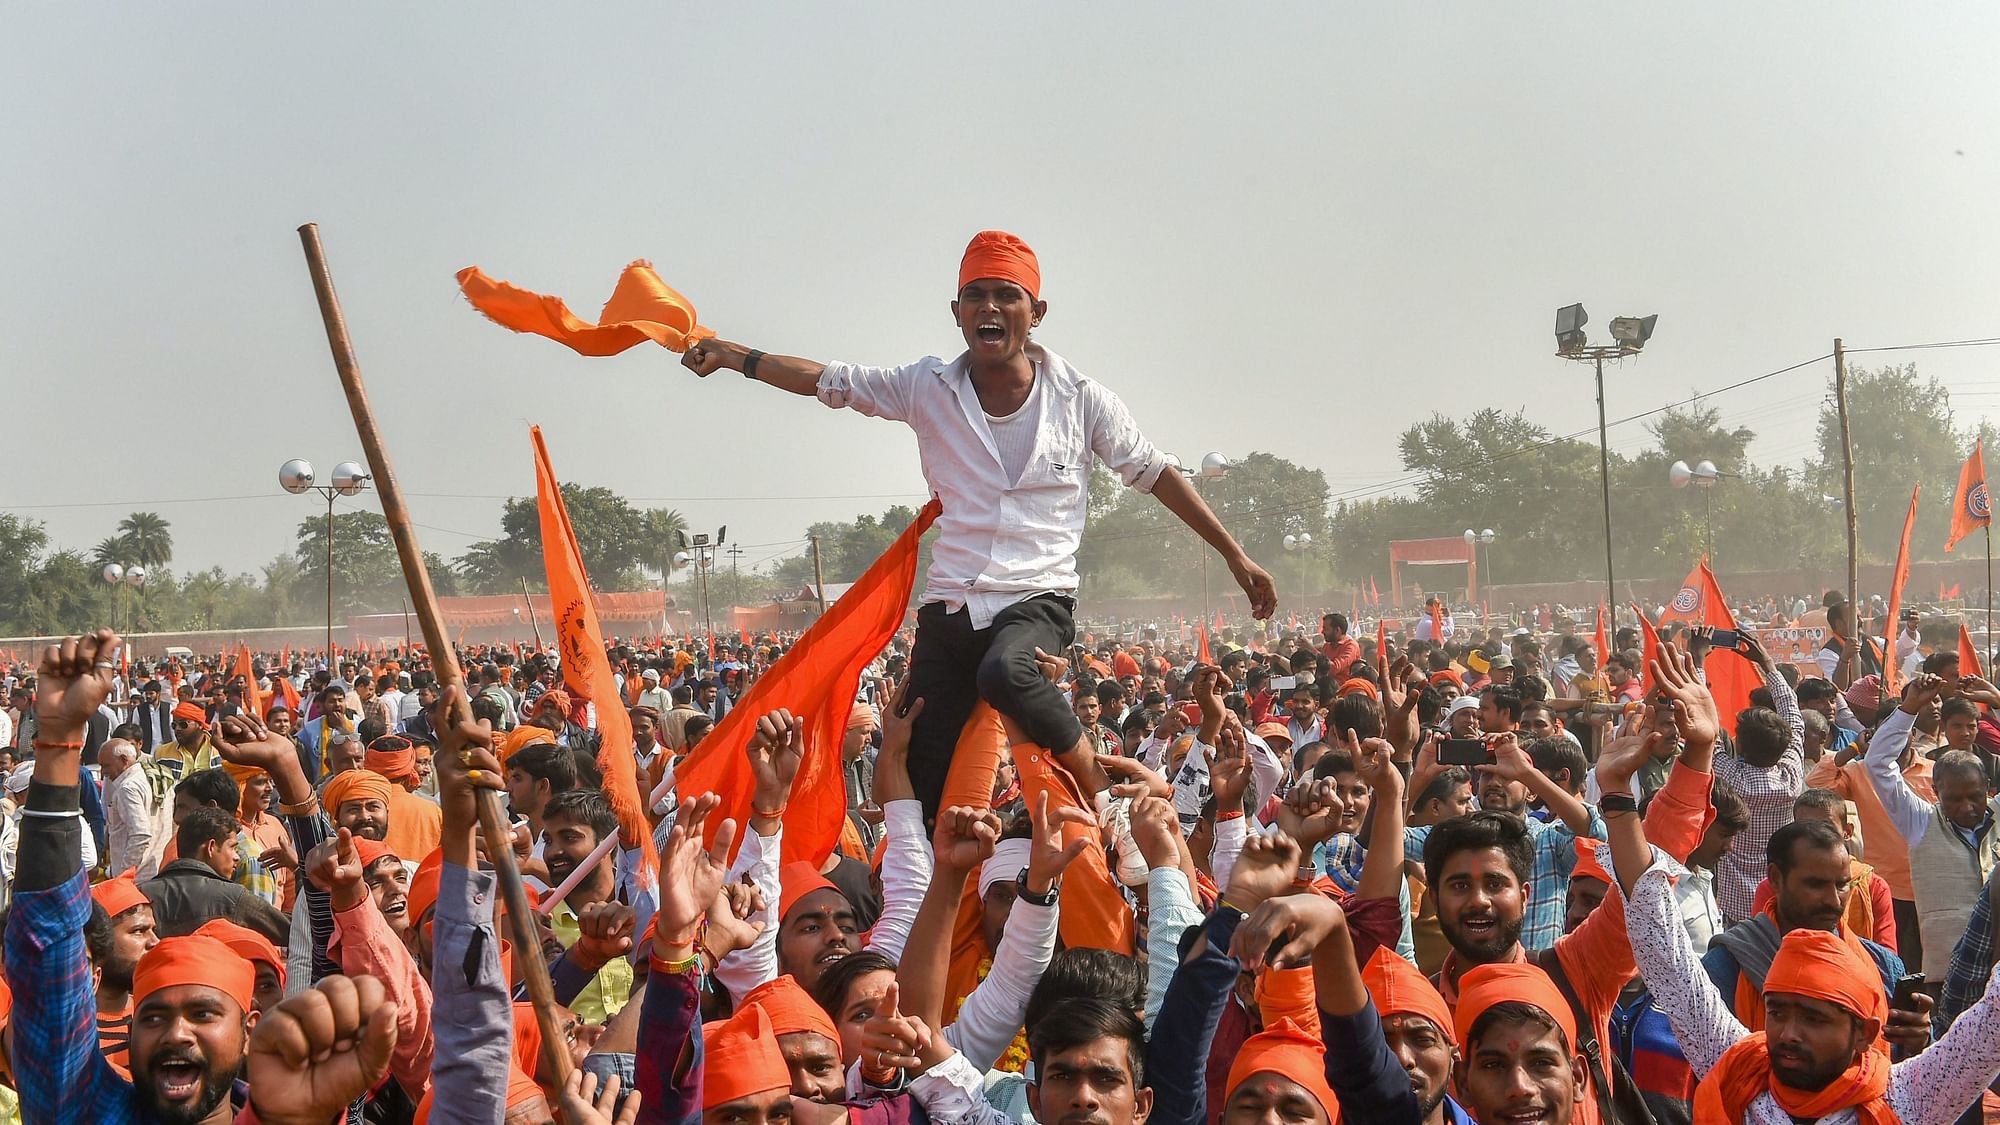 People gather in Ayodhya as the demand for a speedy construction of the Ram Temple at the disputed Babri Masjid site.